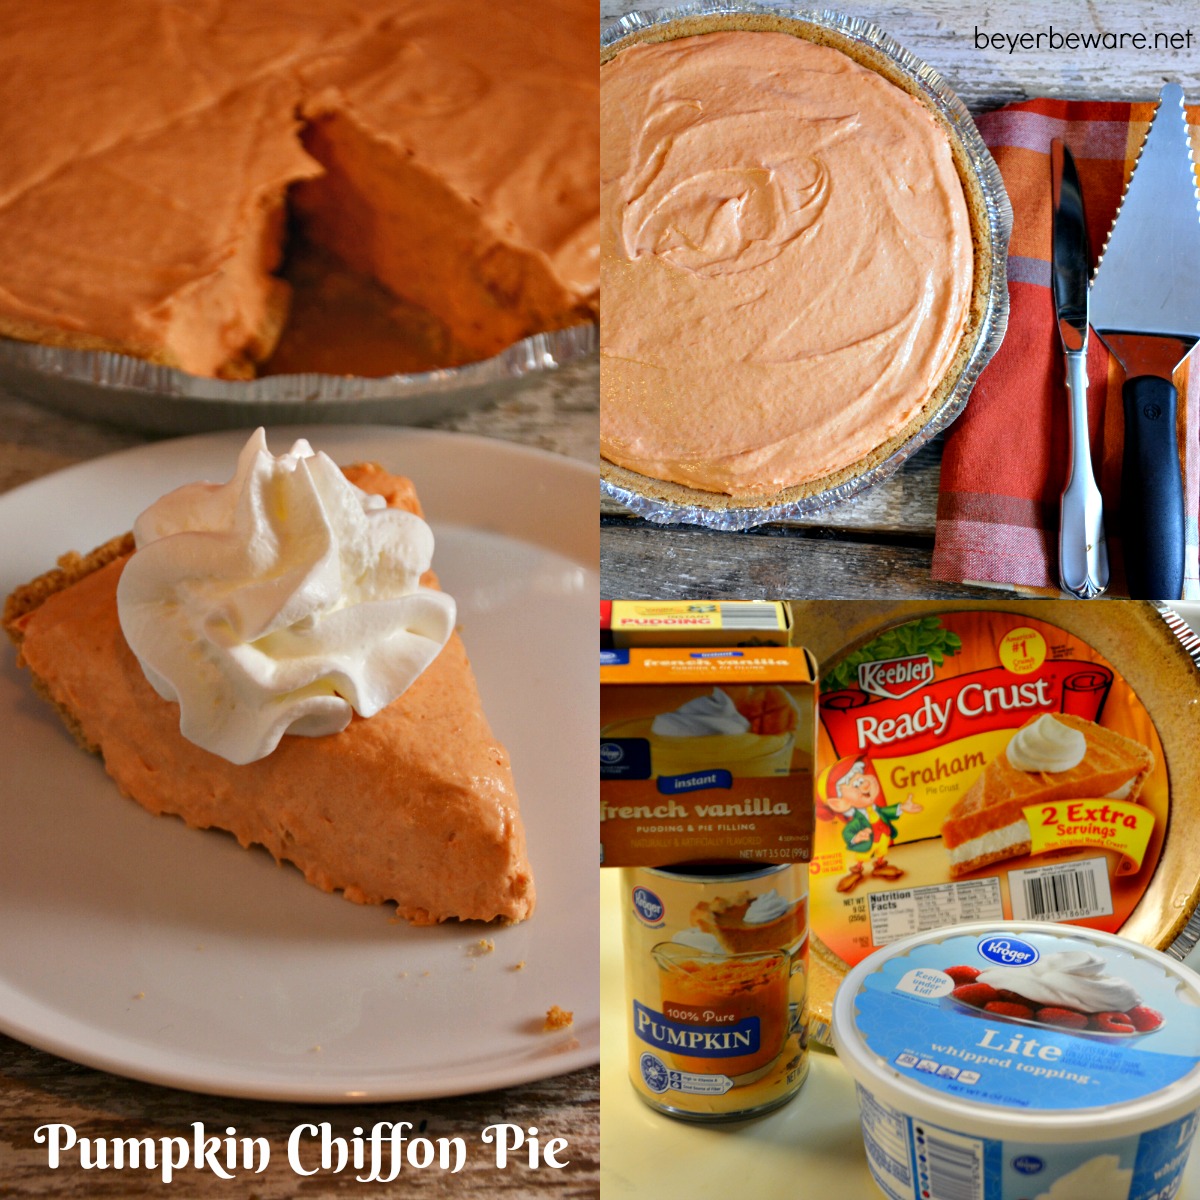 This Pumpkin Chiffon Pie recipe is the silky, creamy version of the traditional pumpkin pie. Made with real pumpkin and pudding, no baking required either.